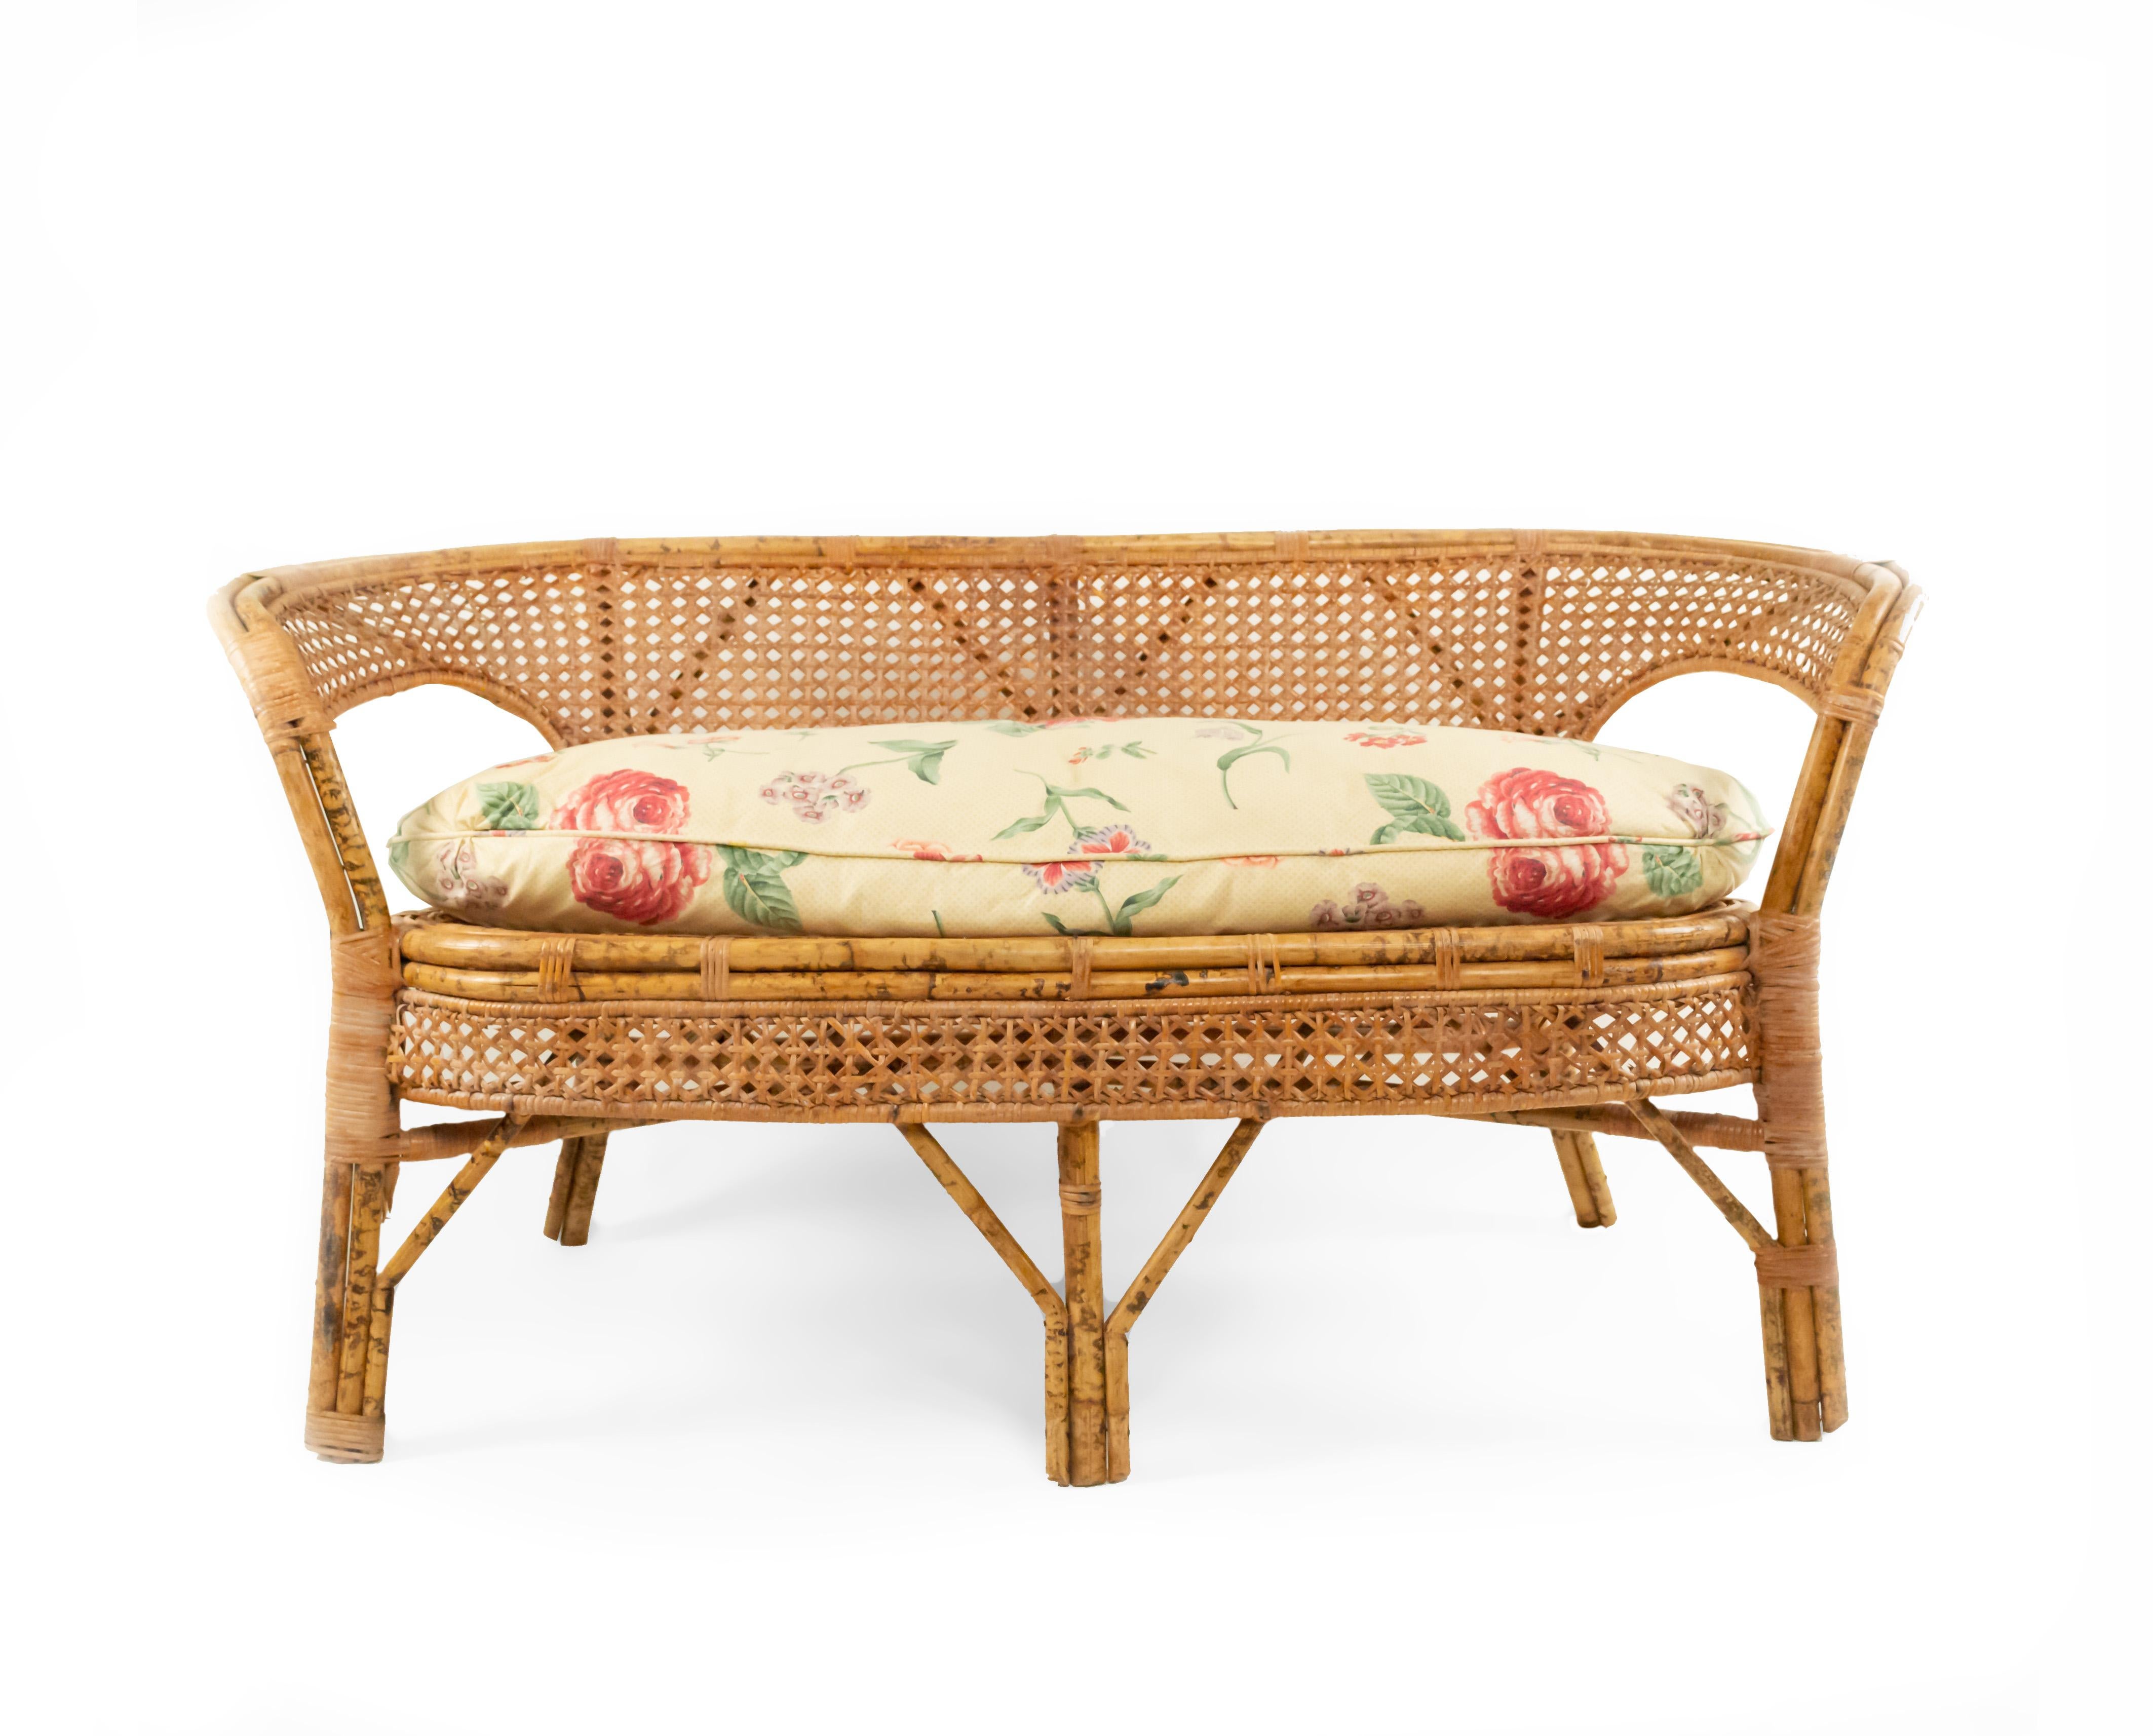 American midcentury wicker love seat with rounded back arms and cane panels with a floral upholstered cushion (circa 1950s-1960s).